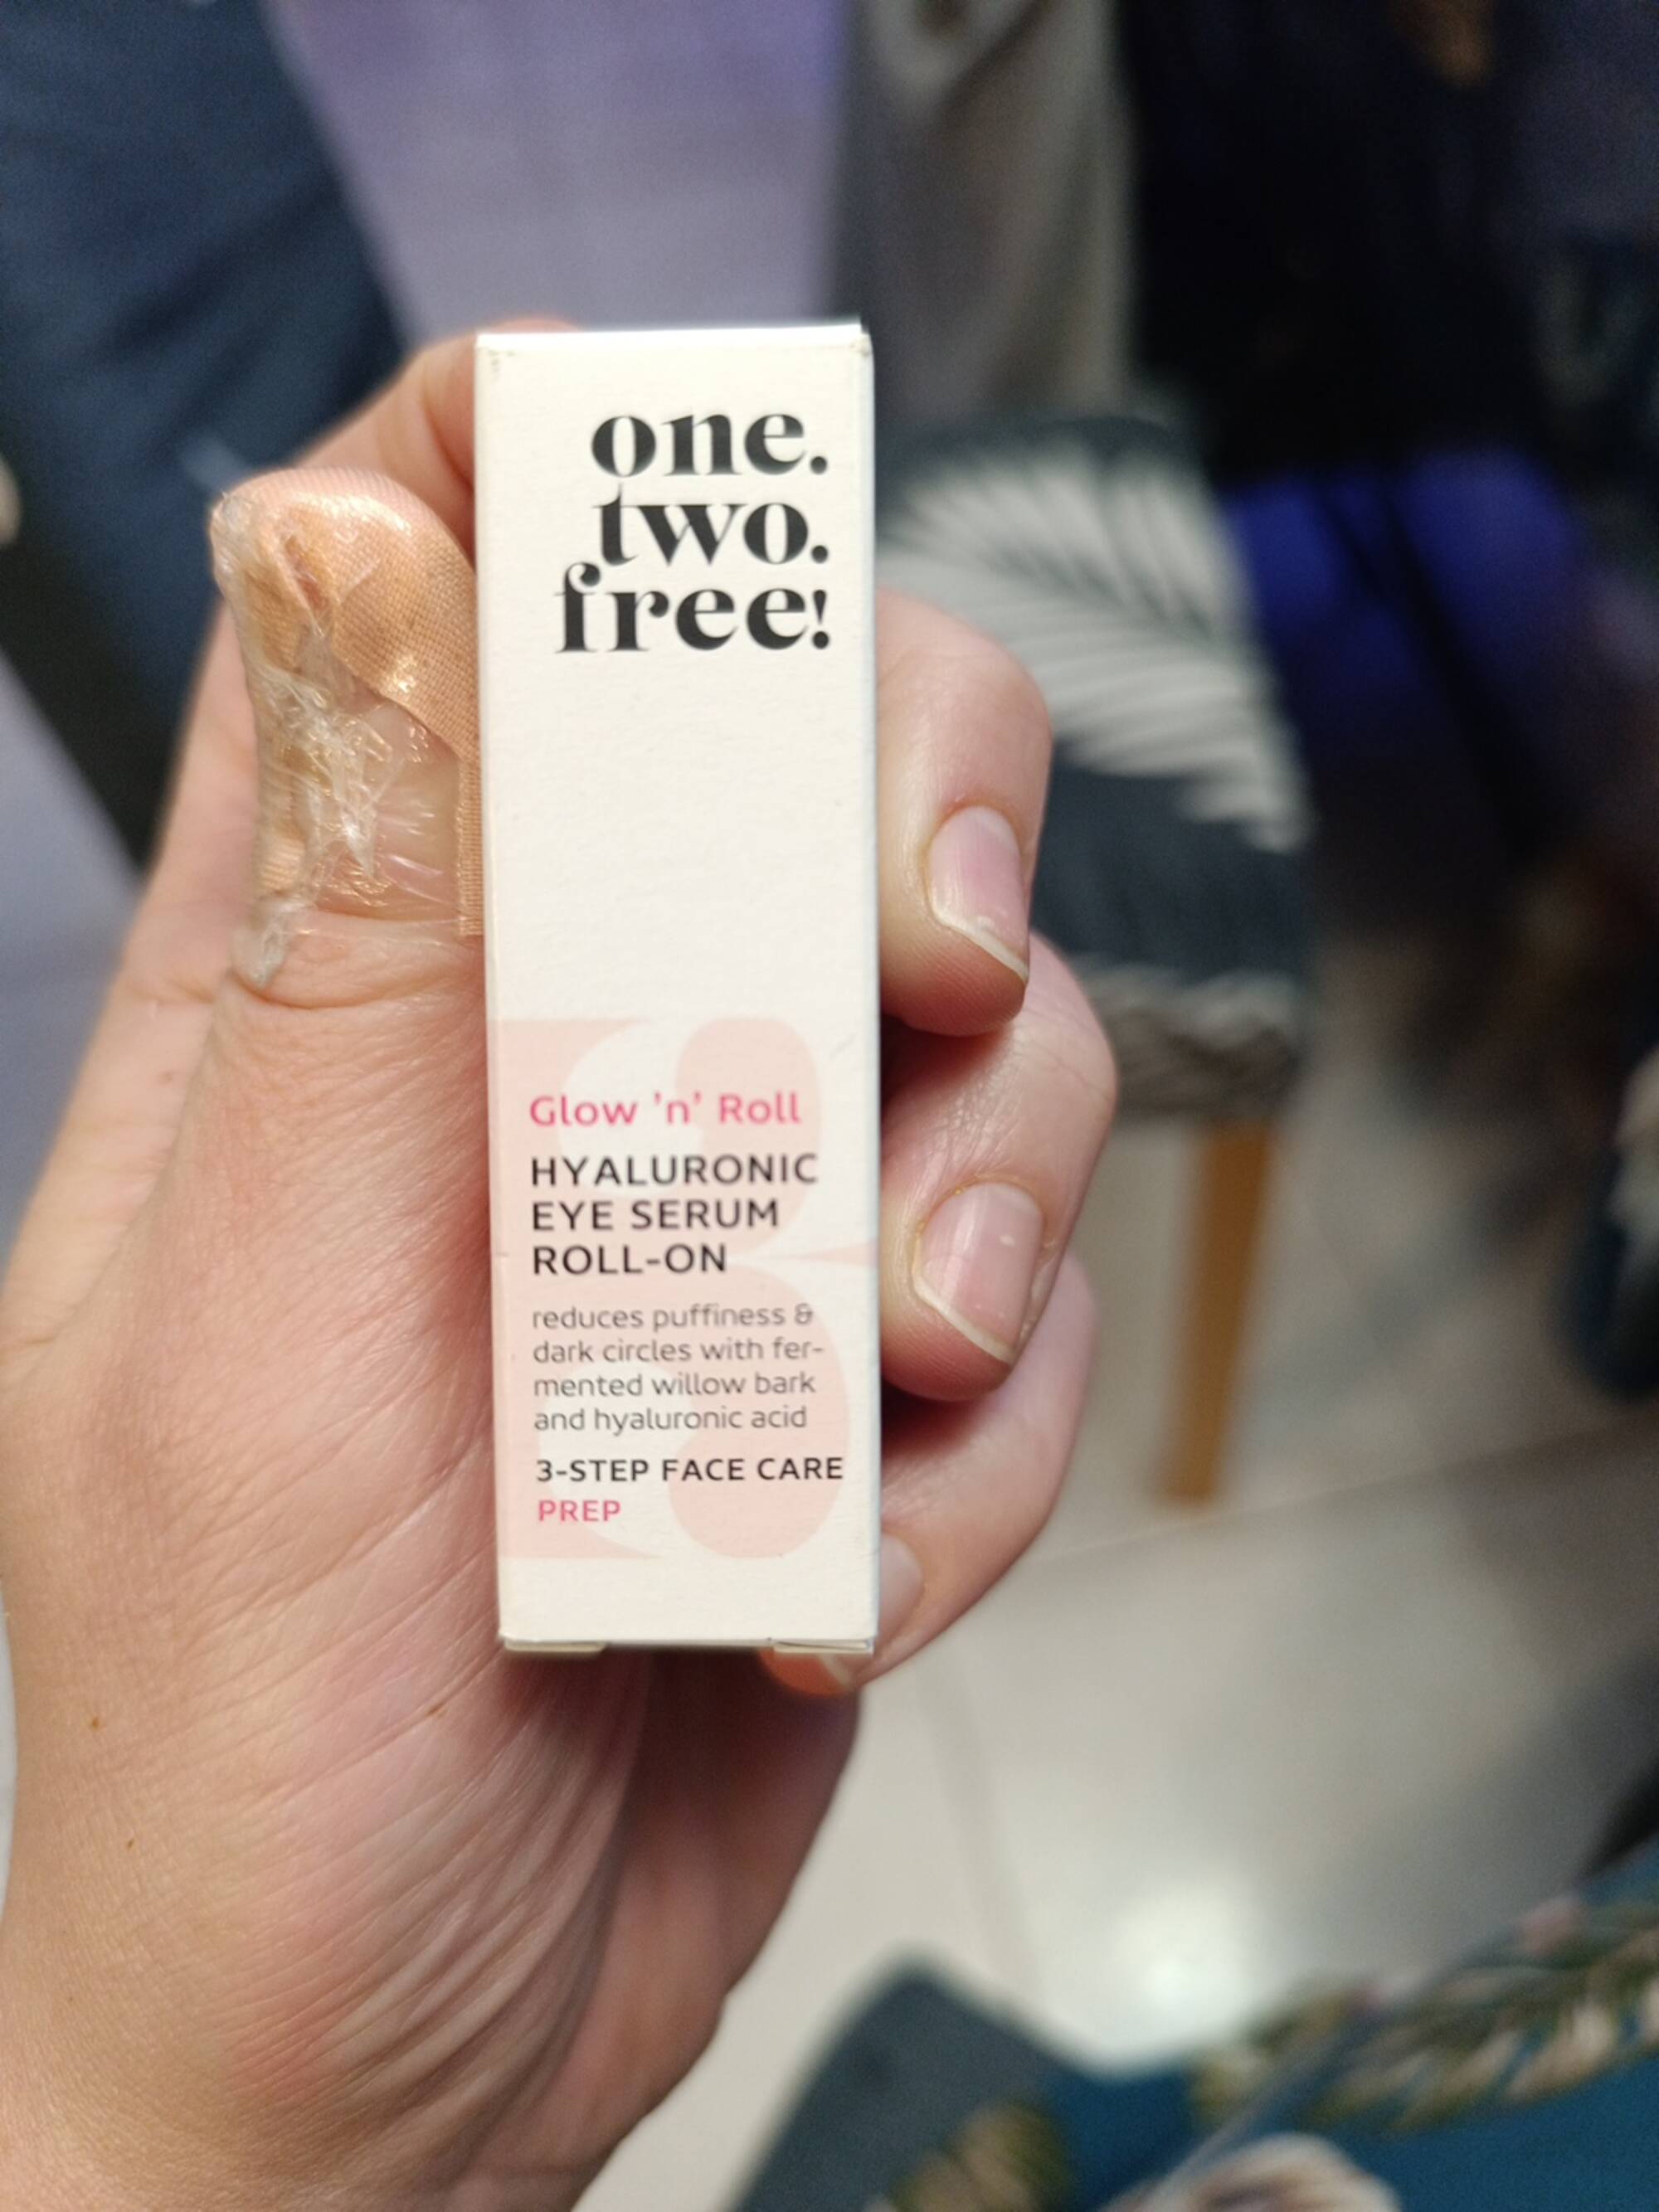 ONE.TWO.FREE! - Hyaluronic eye serum roll-on